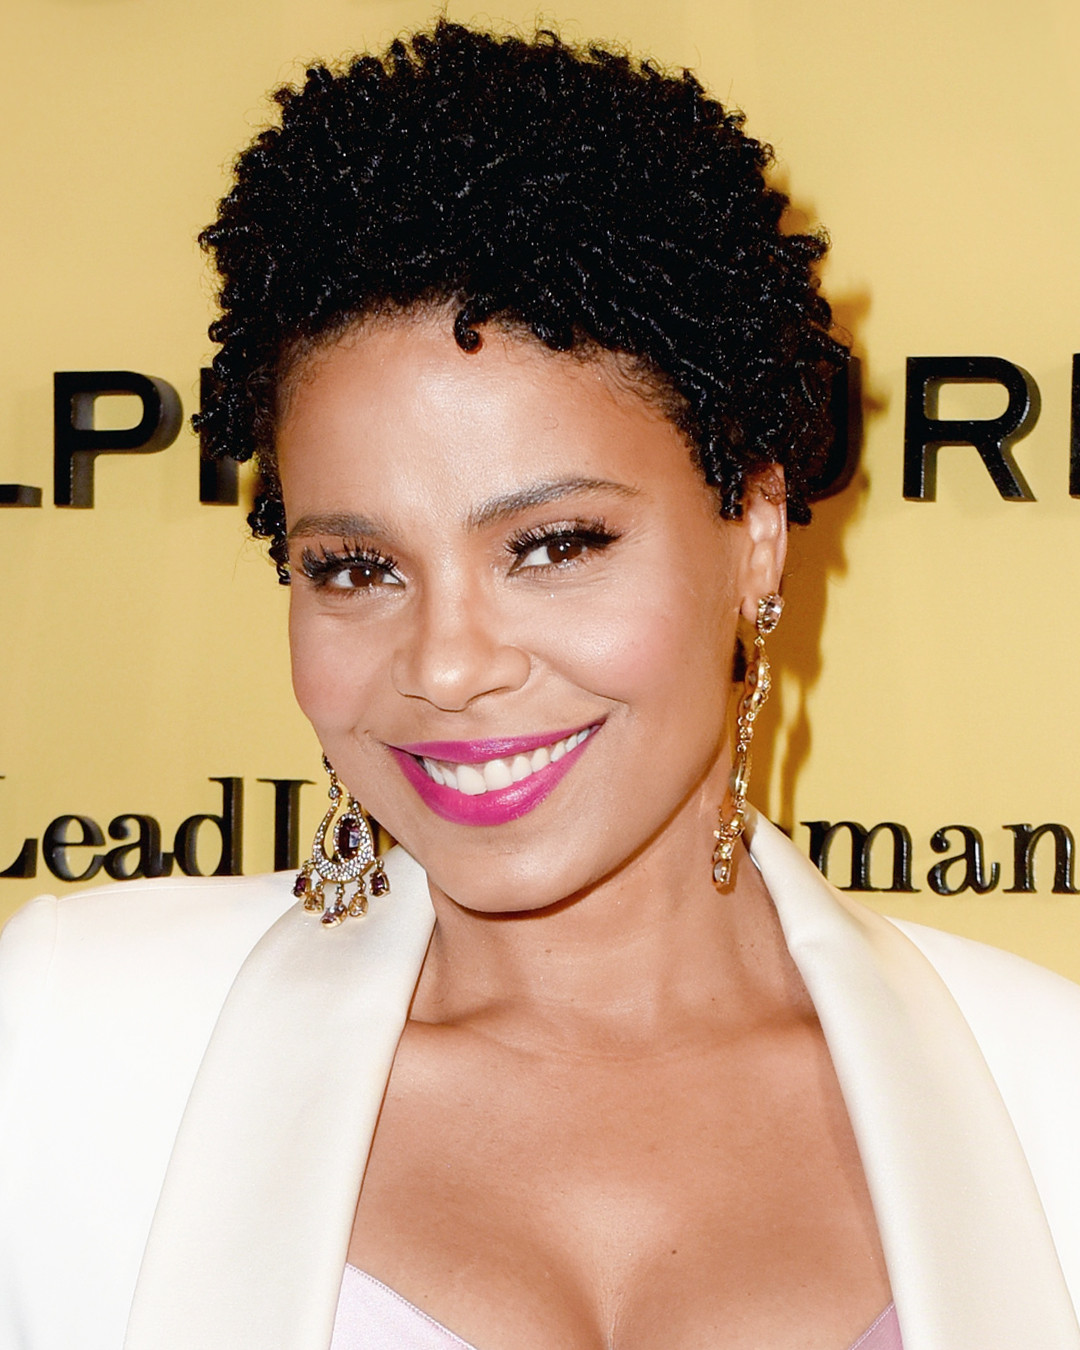 Sanaa Lathan Says Being a Black Woman in Hollywood Has Gotten Easier